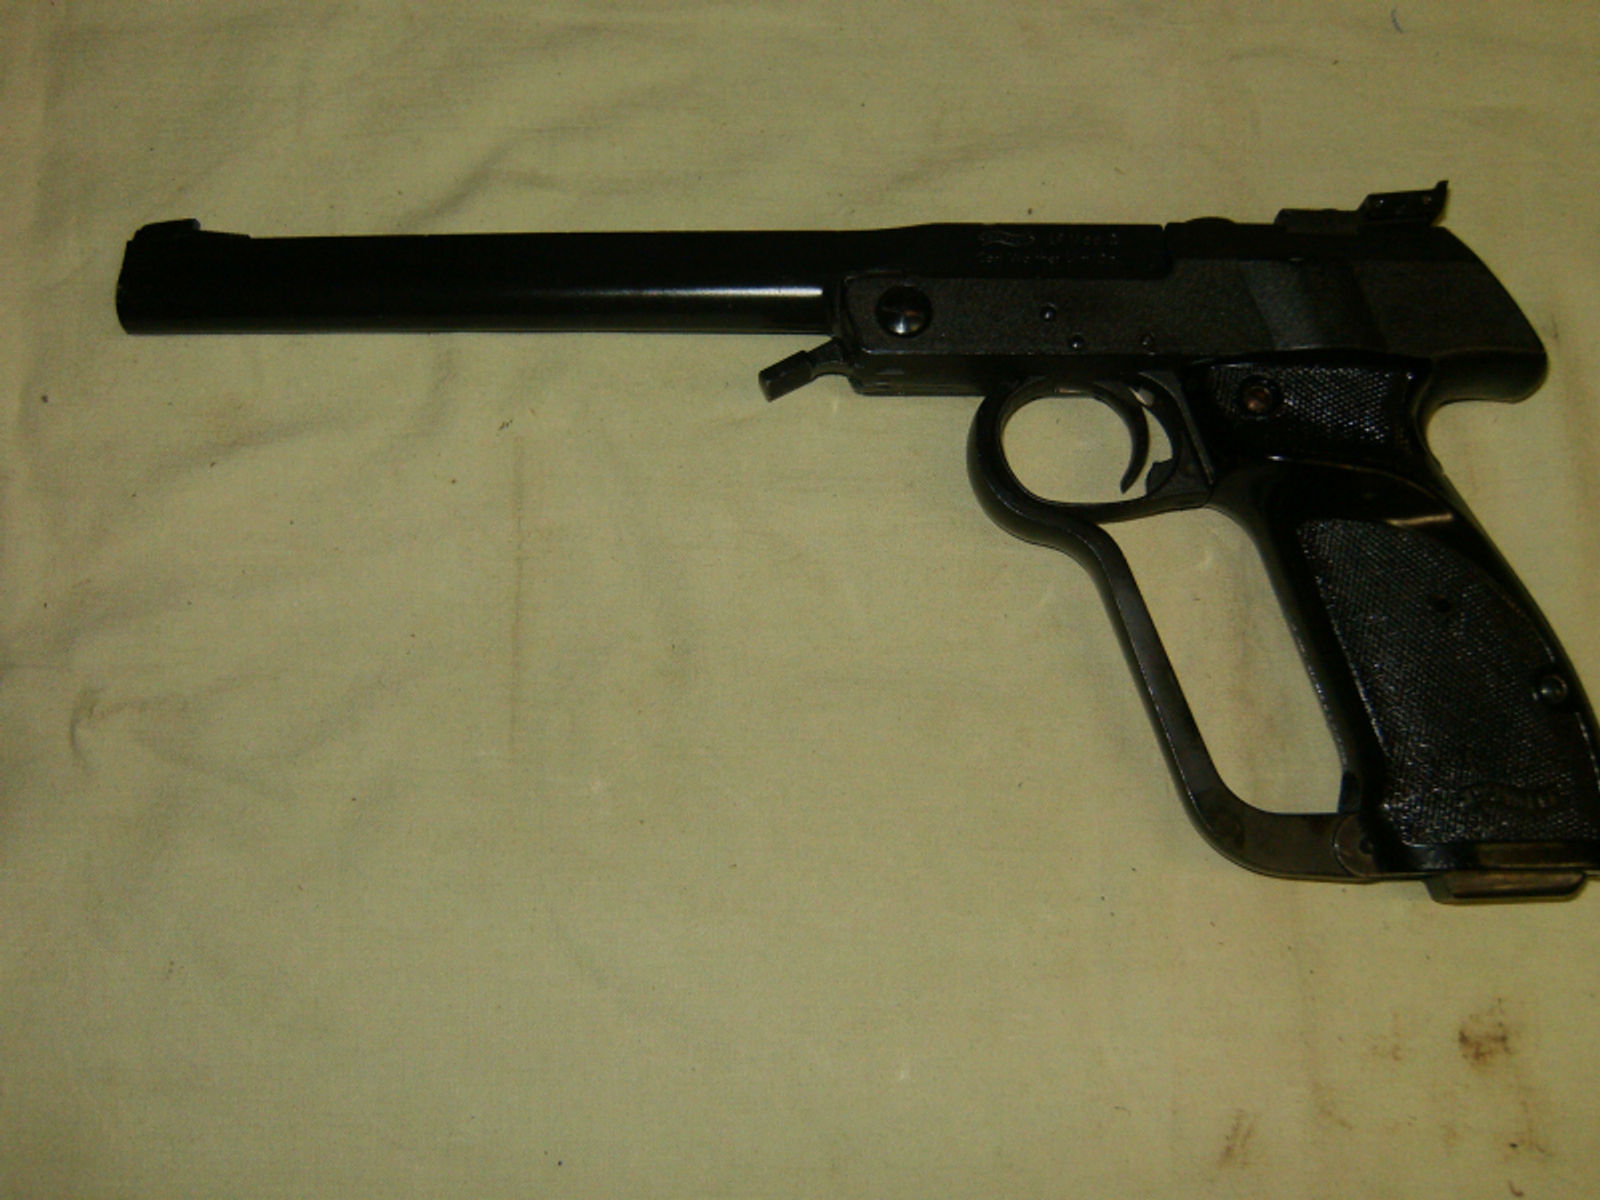 Luftpistole Walther Mod. 2